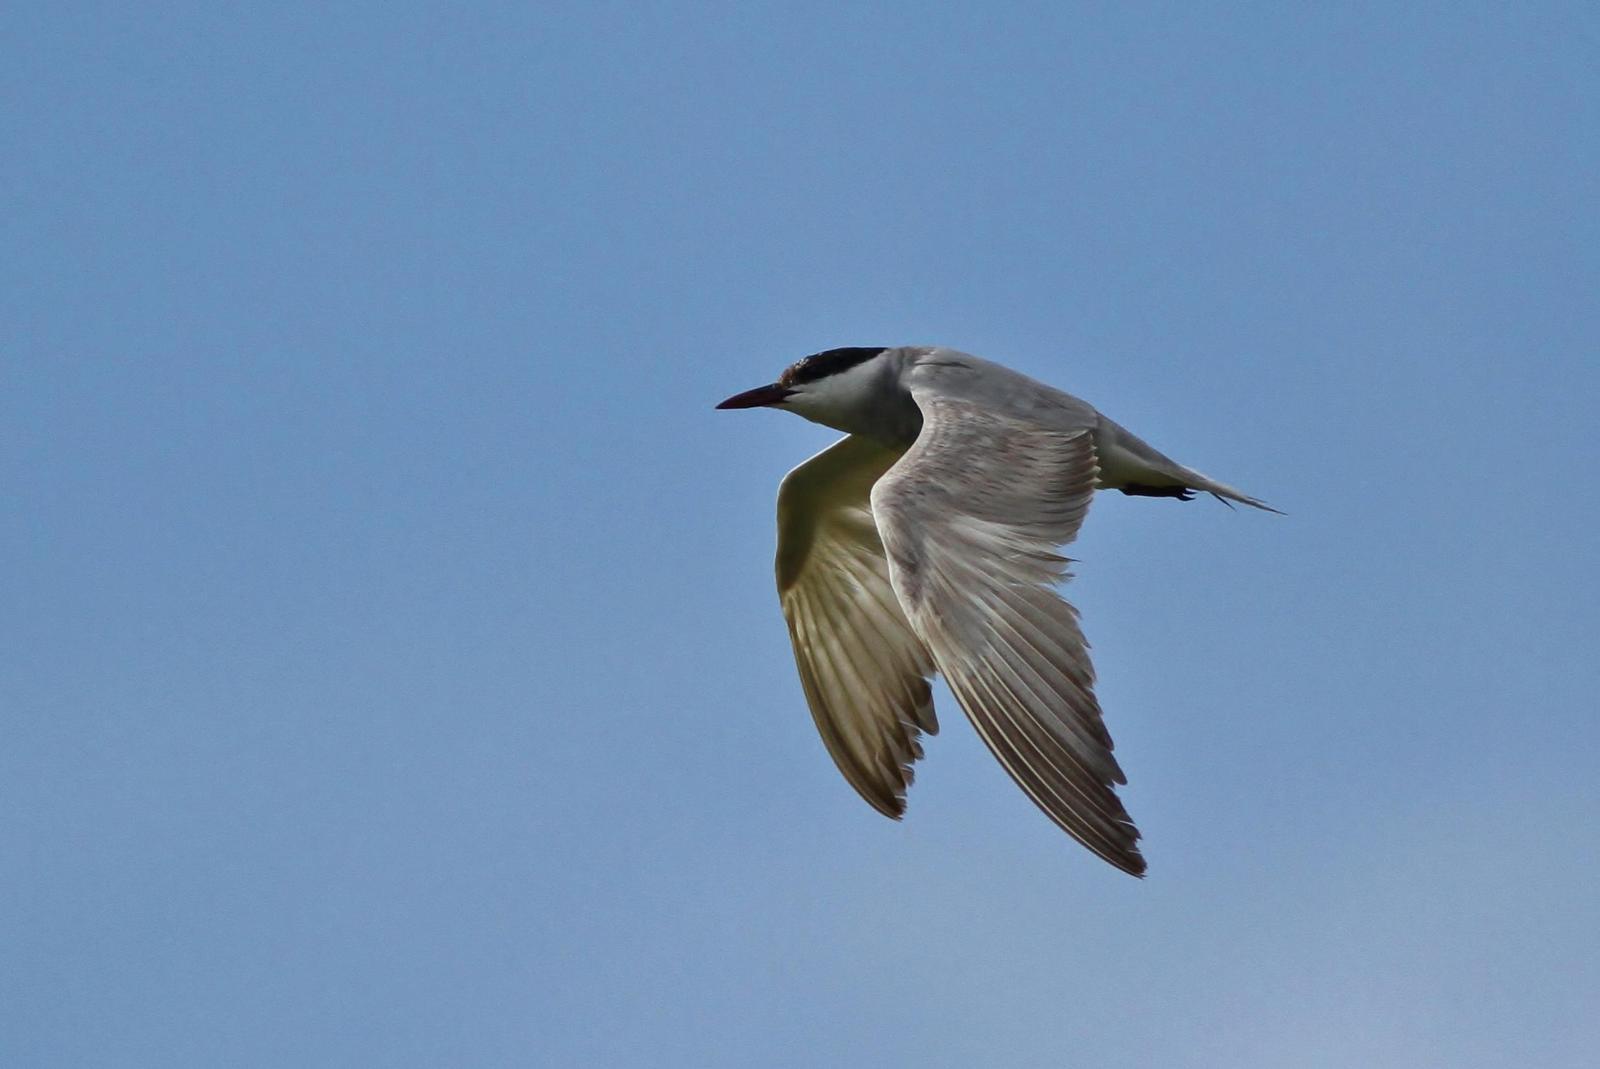 Whiskered Tern Photo by Alex Lamoreaux